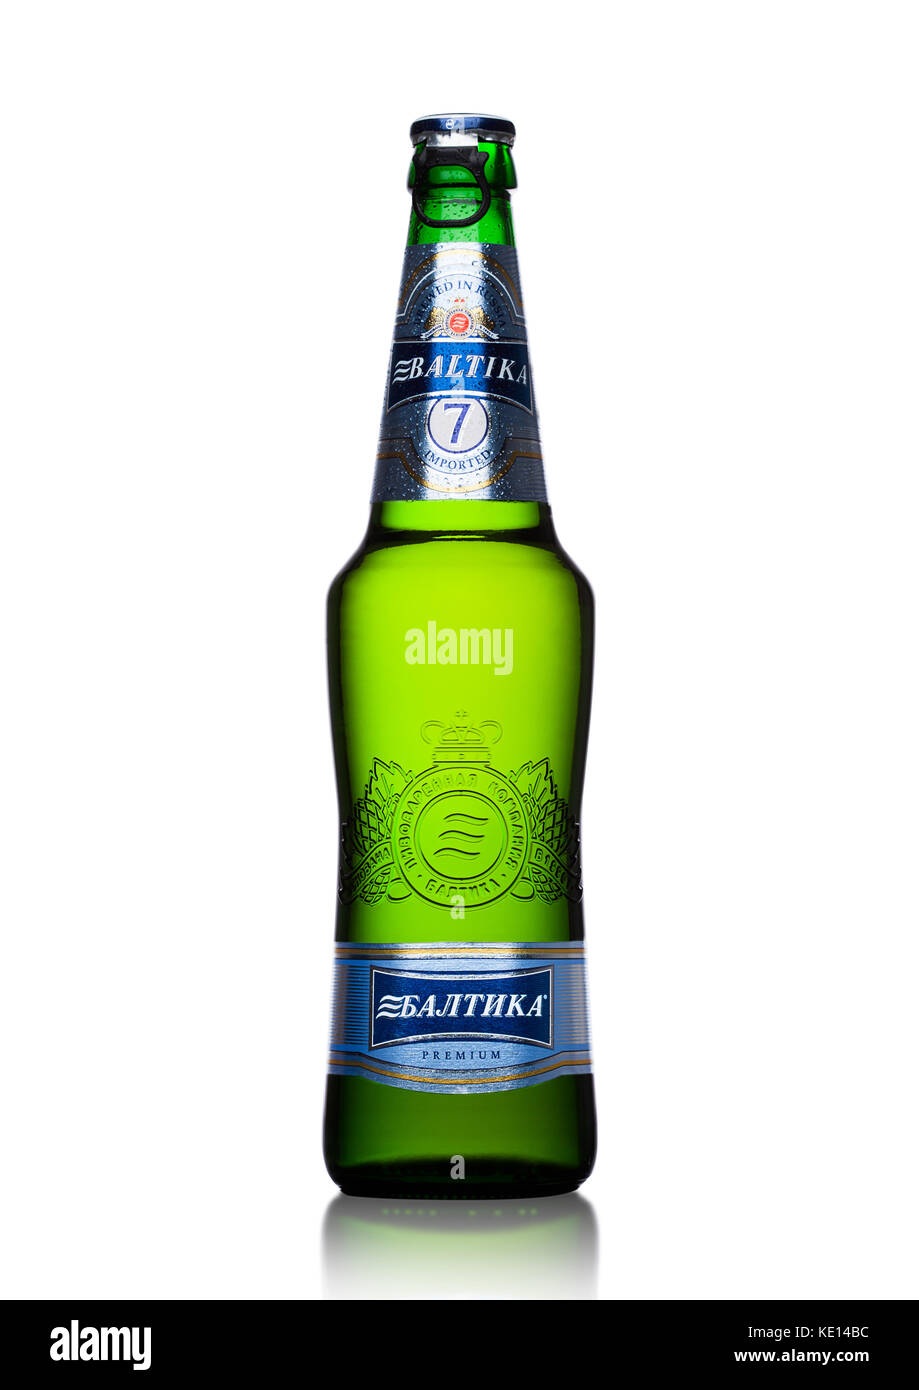 LONDON, UK - MAY 15, 2017: A bottle of Baltika Lager beer number Seven premium on white background. Baltika is the second largest brewing company in R Stock Photo